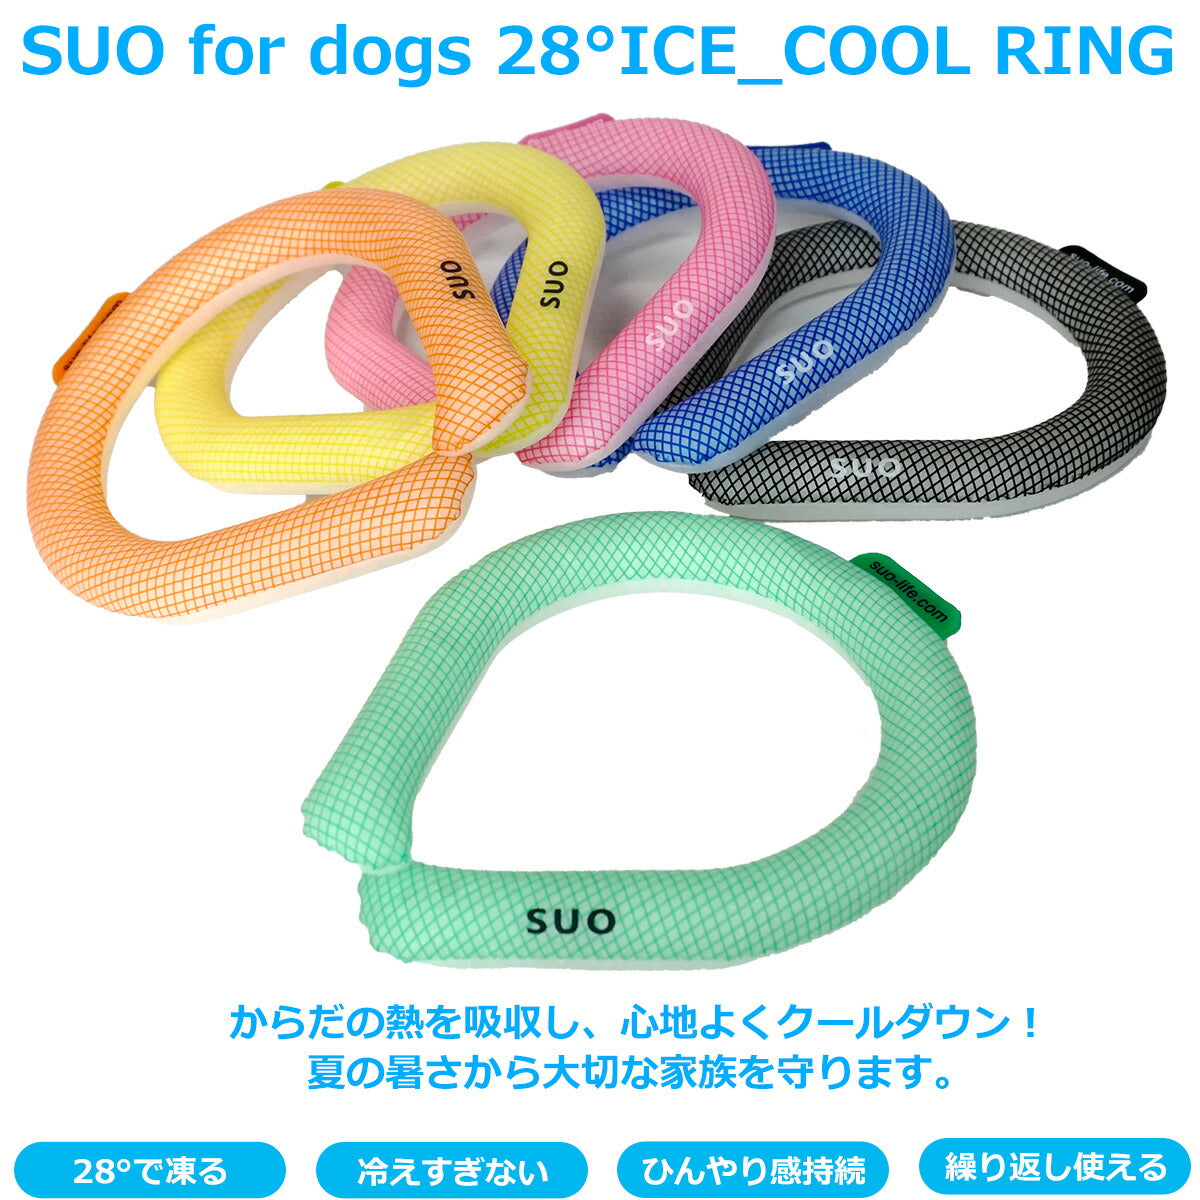 SUO for dogs 28°ICE SUOリング ボタンなし M ブルー 熱中症対策グッズ 暑さ対策 ひんやり 首 冷感 犬 大人 子供